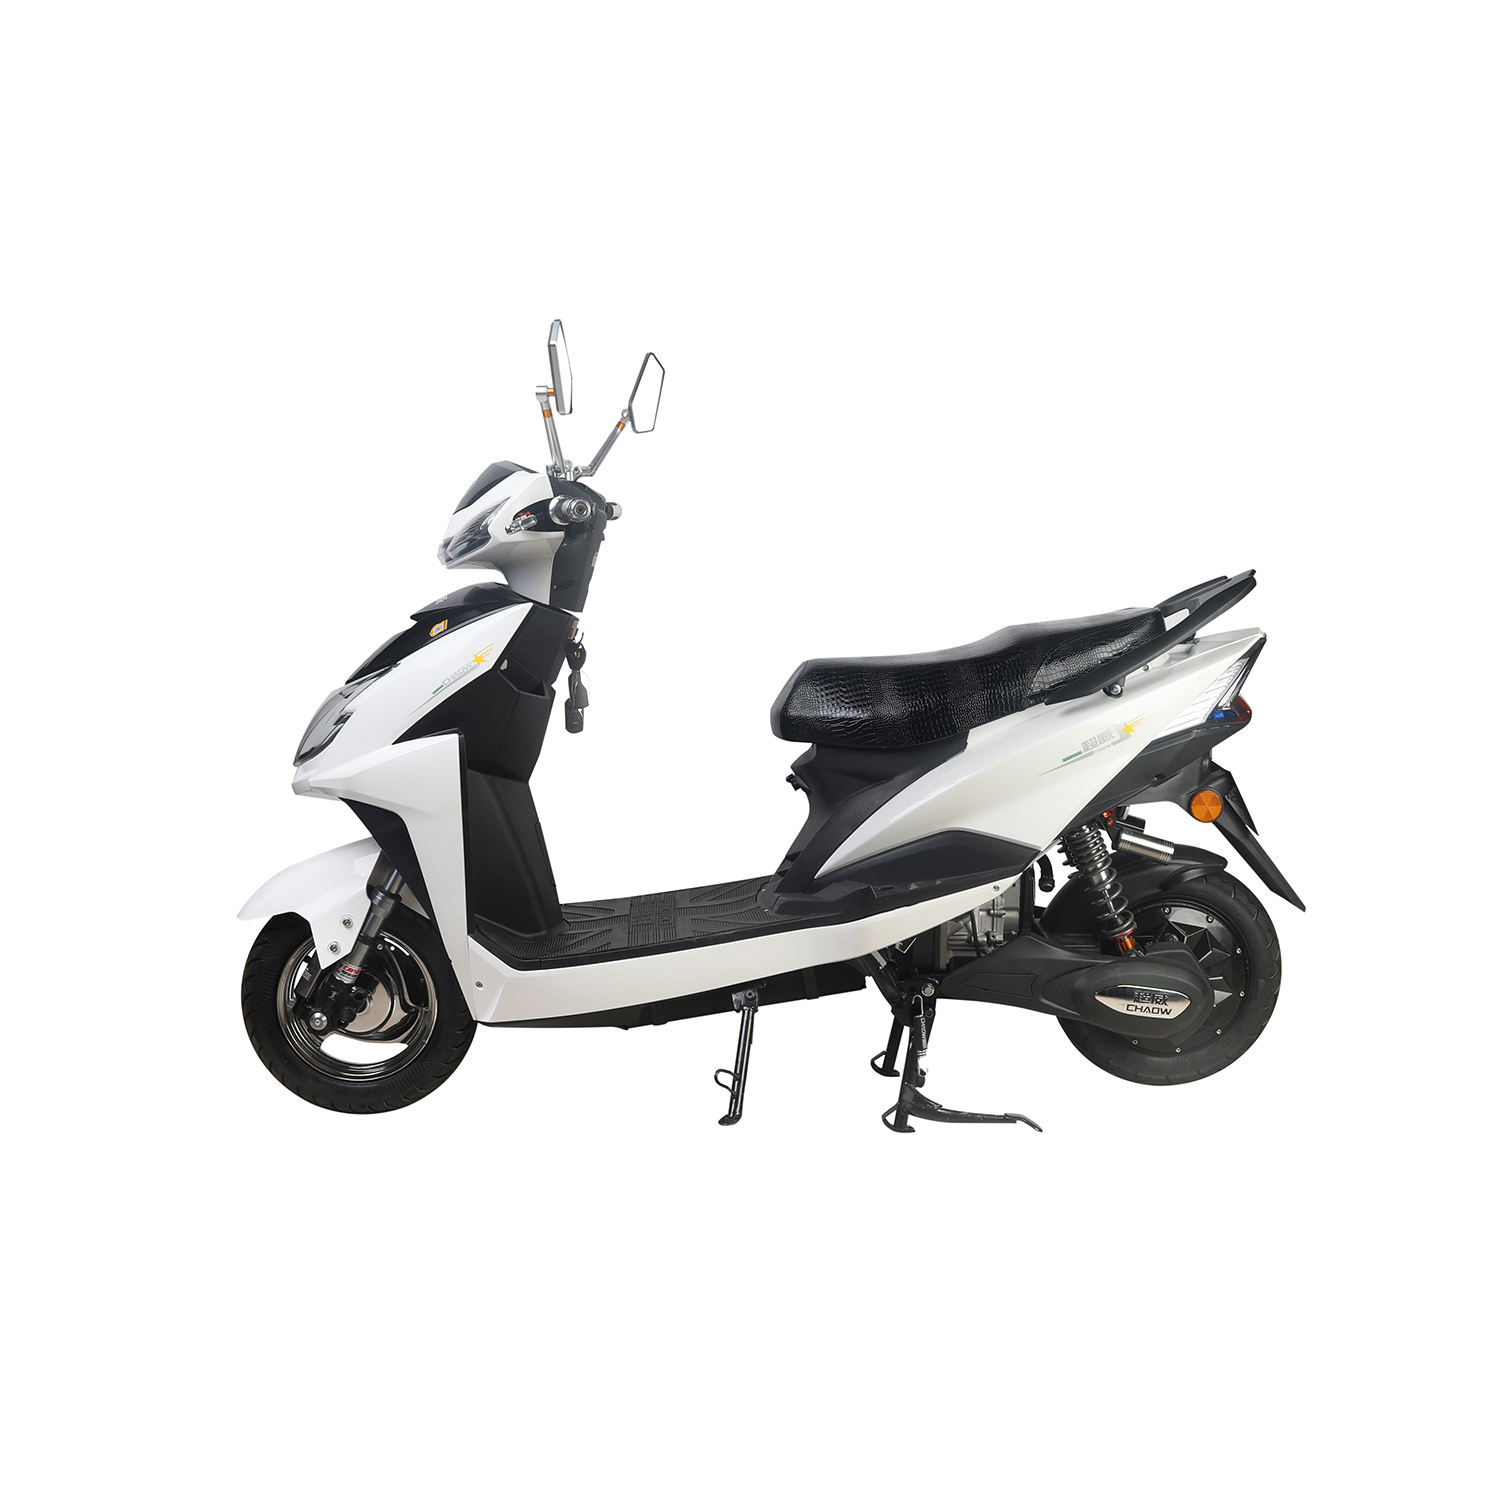 HYBIRD ELECTRICAL MOTORCYCLE BIKES 1000W POWERFUL WITH 50CC ENGINE (HH-XY)